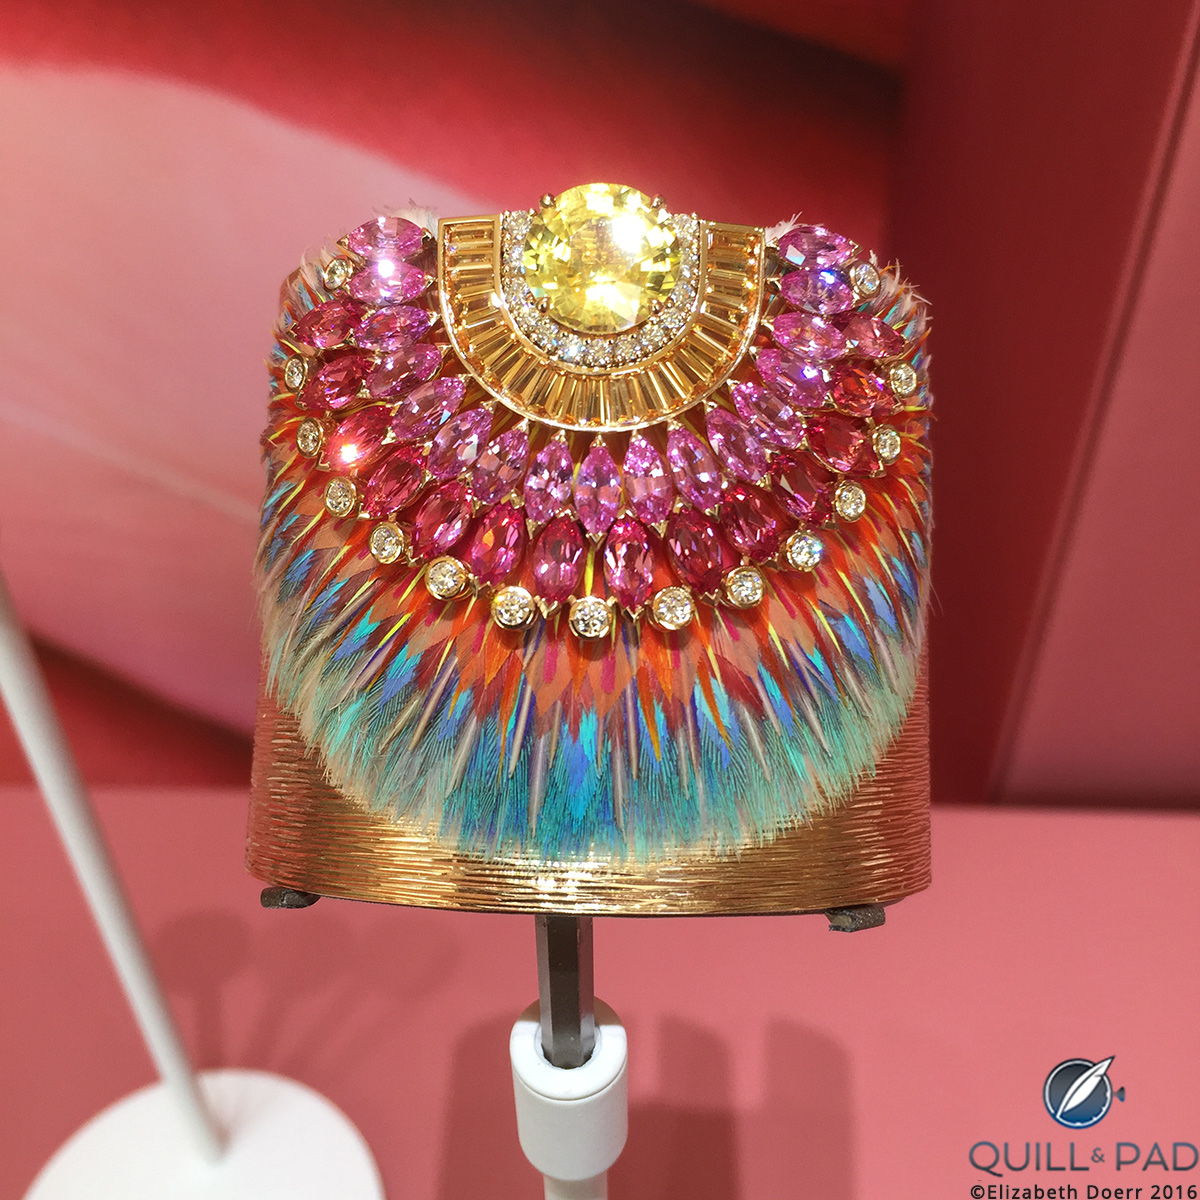 One-of-a-kind Piaget cuff’s unique feather marquetry crowned by an exquisite non-heat-treated yellow sapphire framed by baguette-cut spessartites and marquise-cut pink sapphires